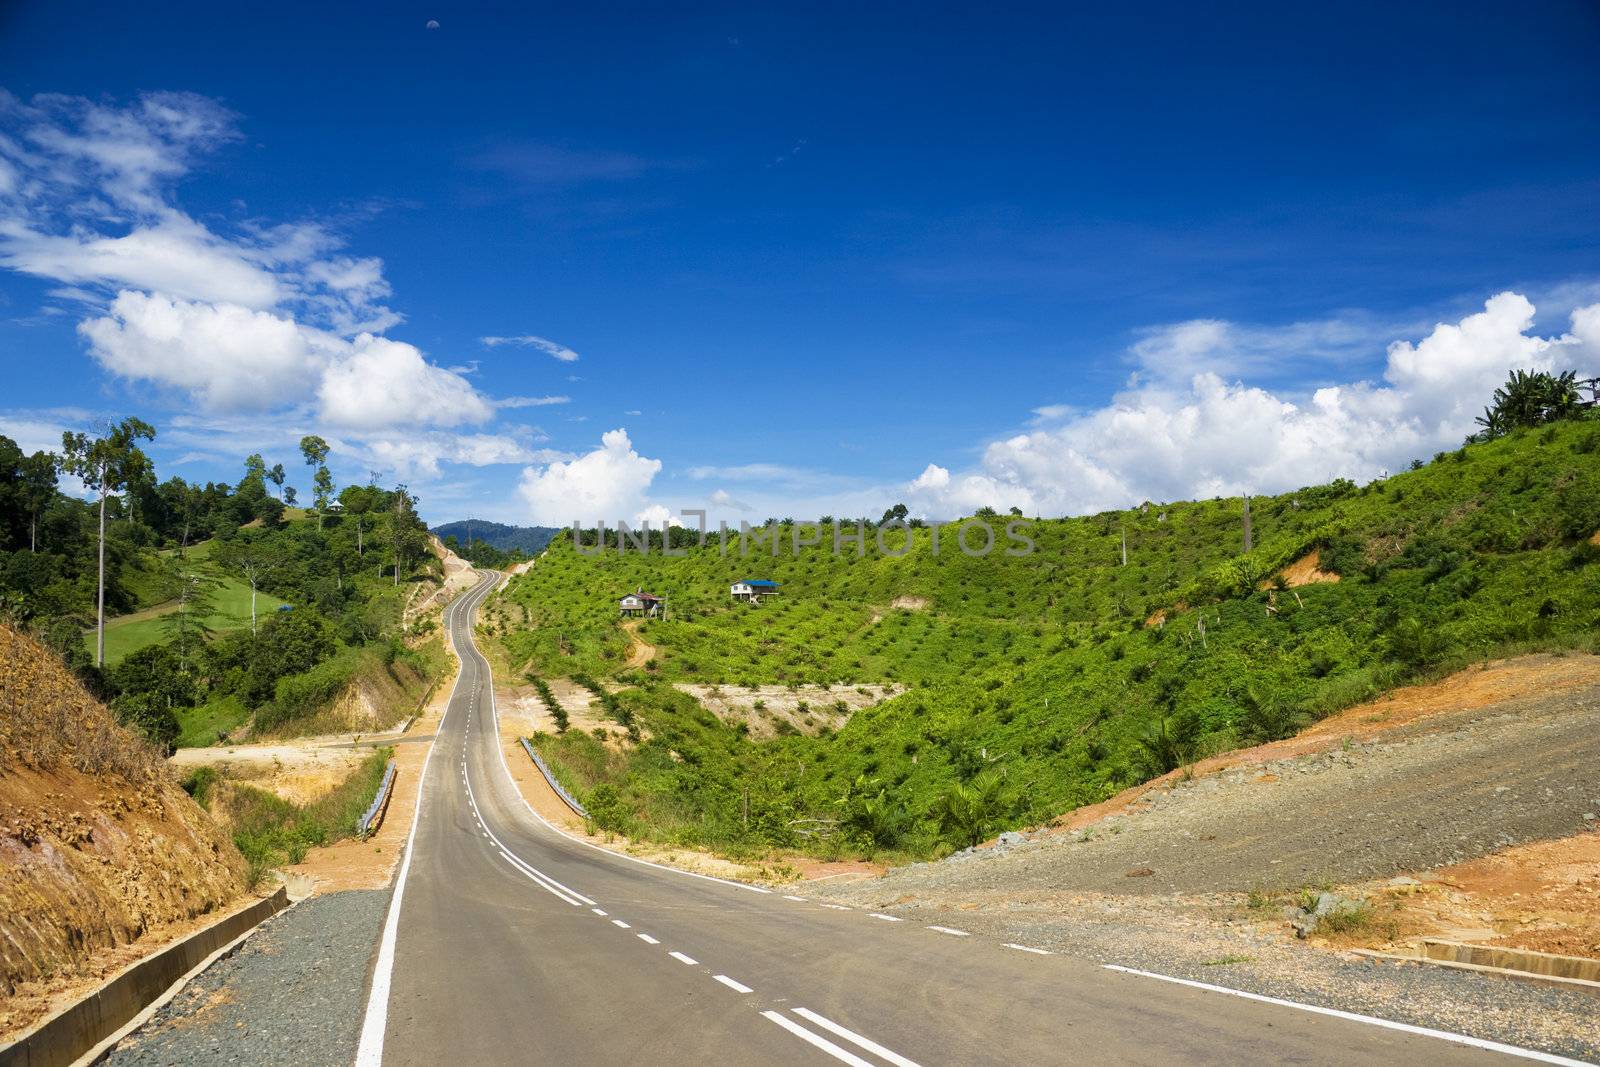 New Road Through Oil Palm Estate by shariffc